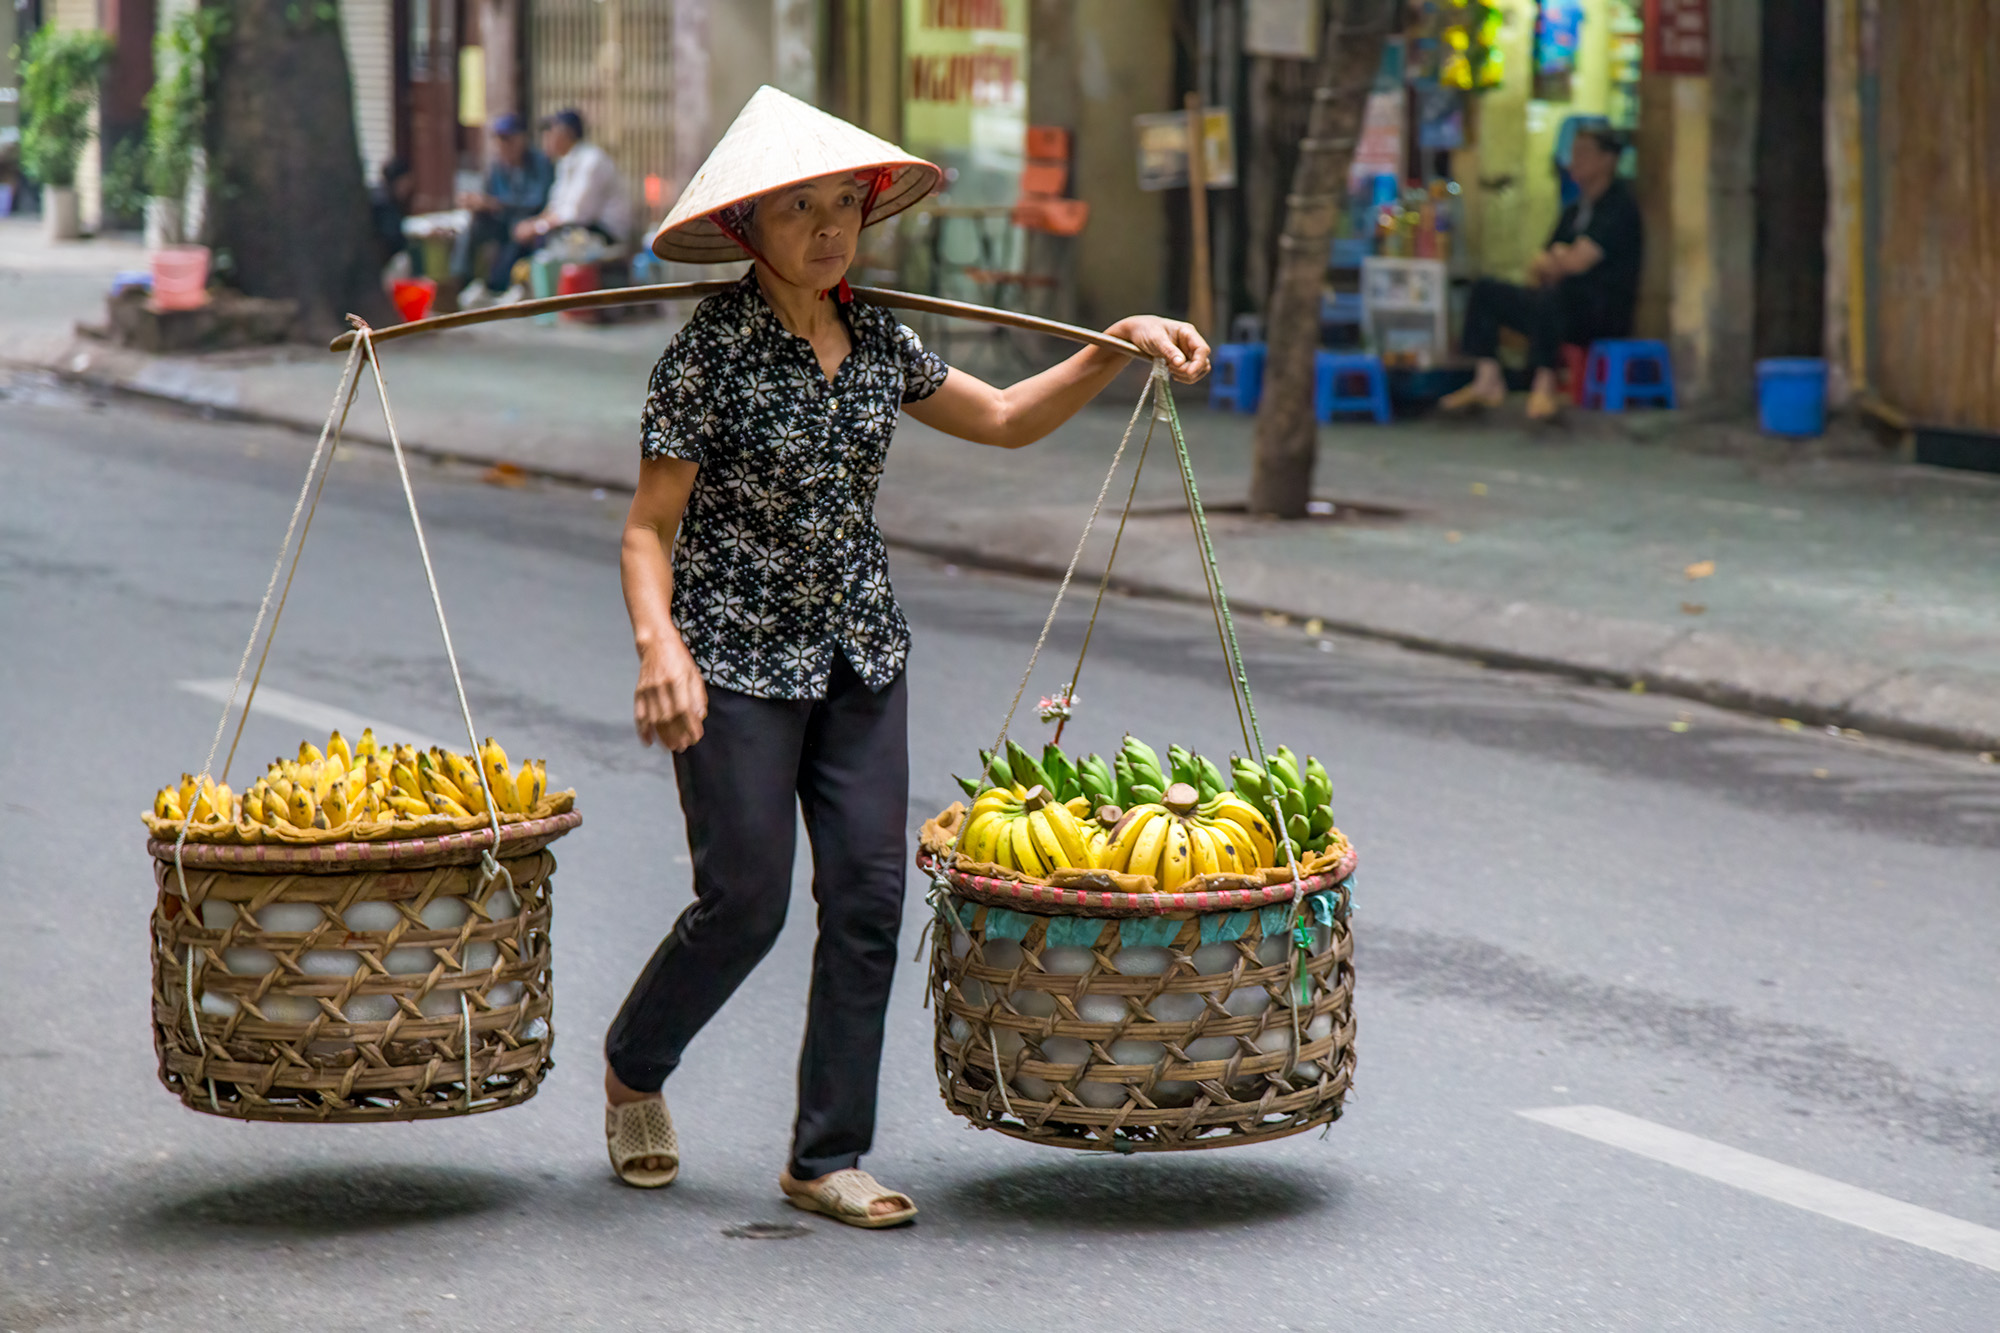 In the bustling streets of Hanoi, Vietnam, a hardworking street vendor carries the weight of her livelihood with unwavering determination...